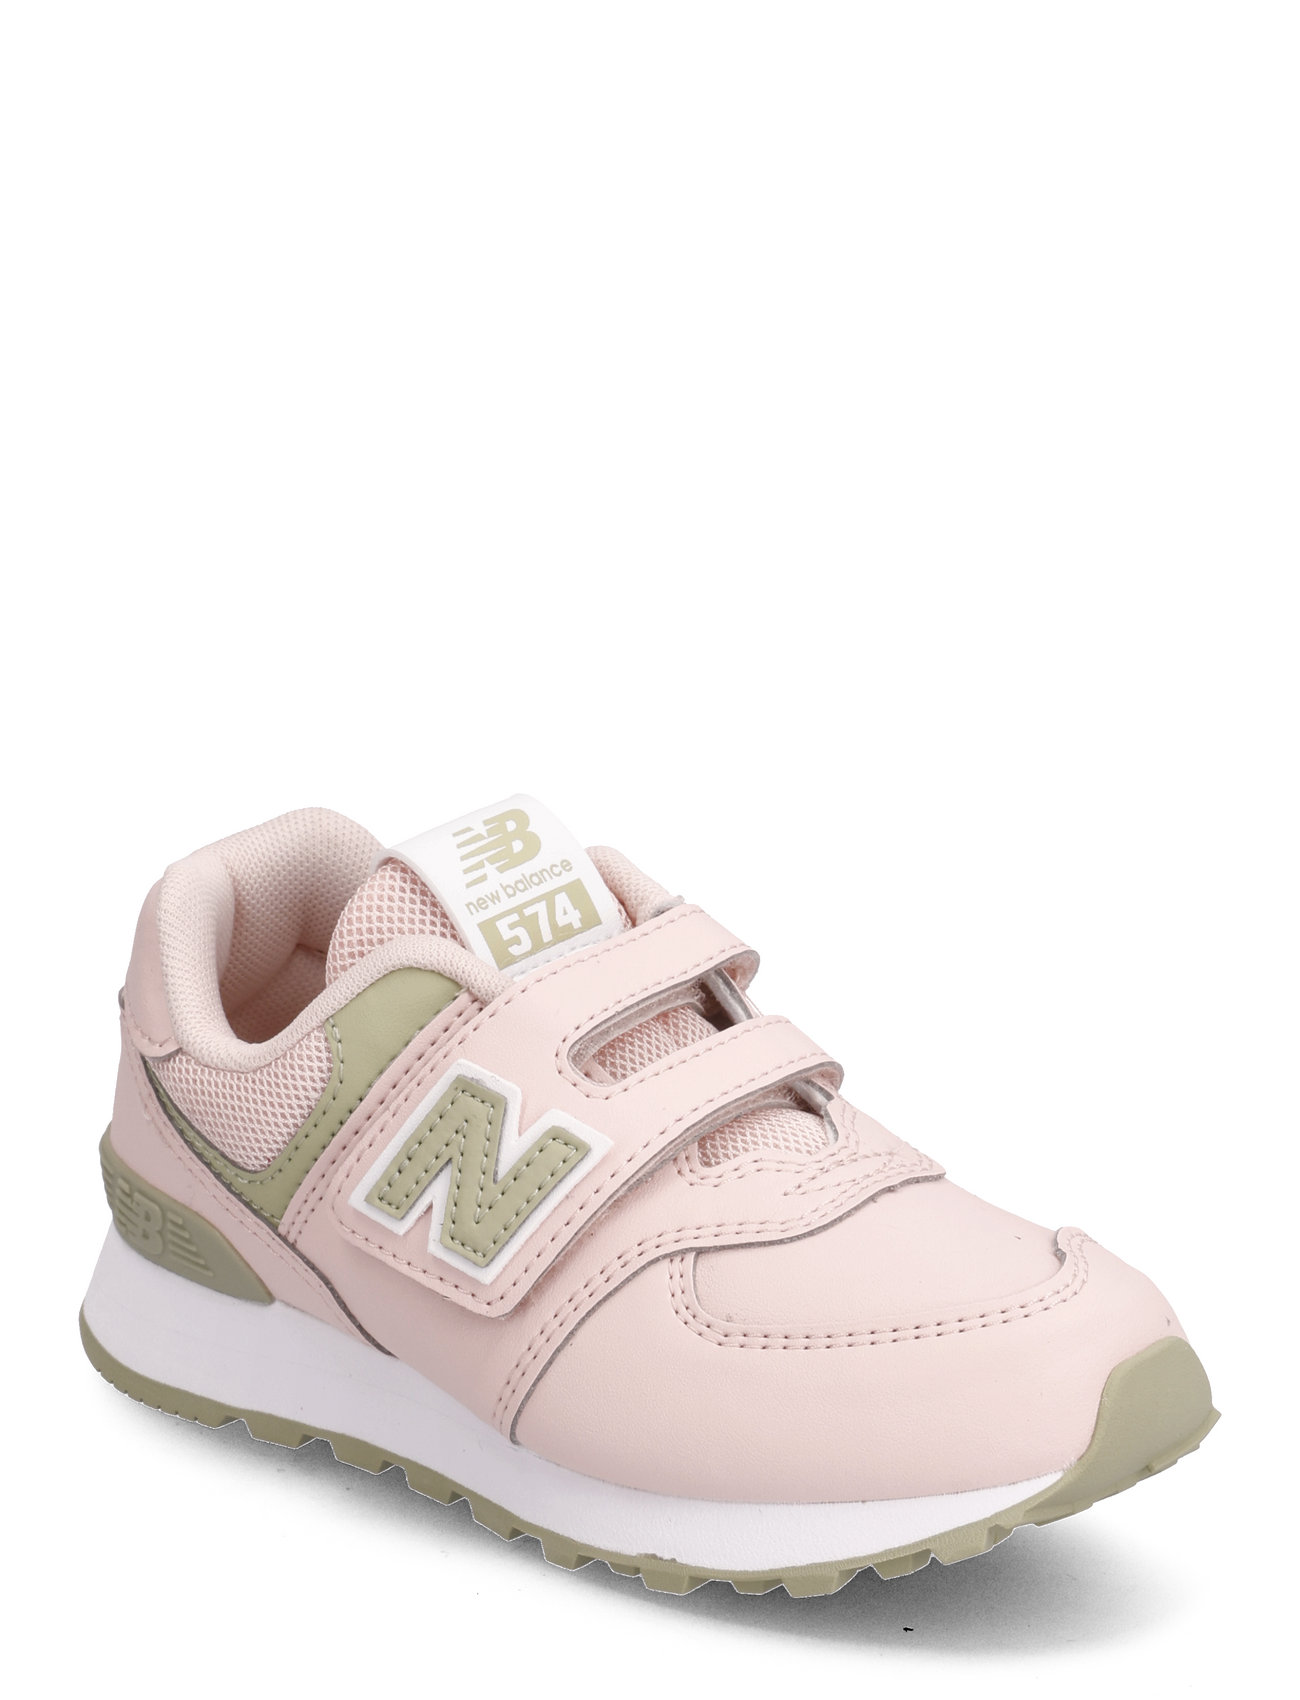 New Balance 574 Hook And Loop Sport Sneakers Low-top Sneakers Pink New Balance